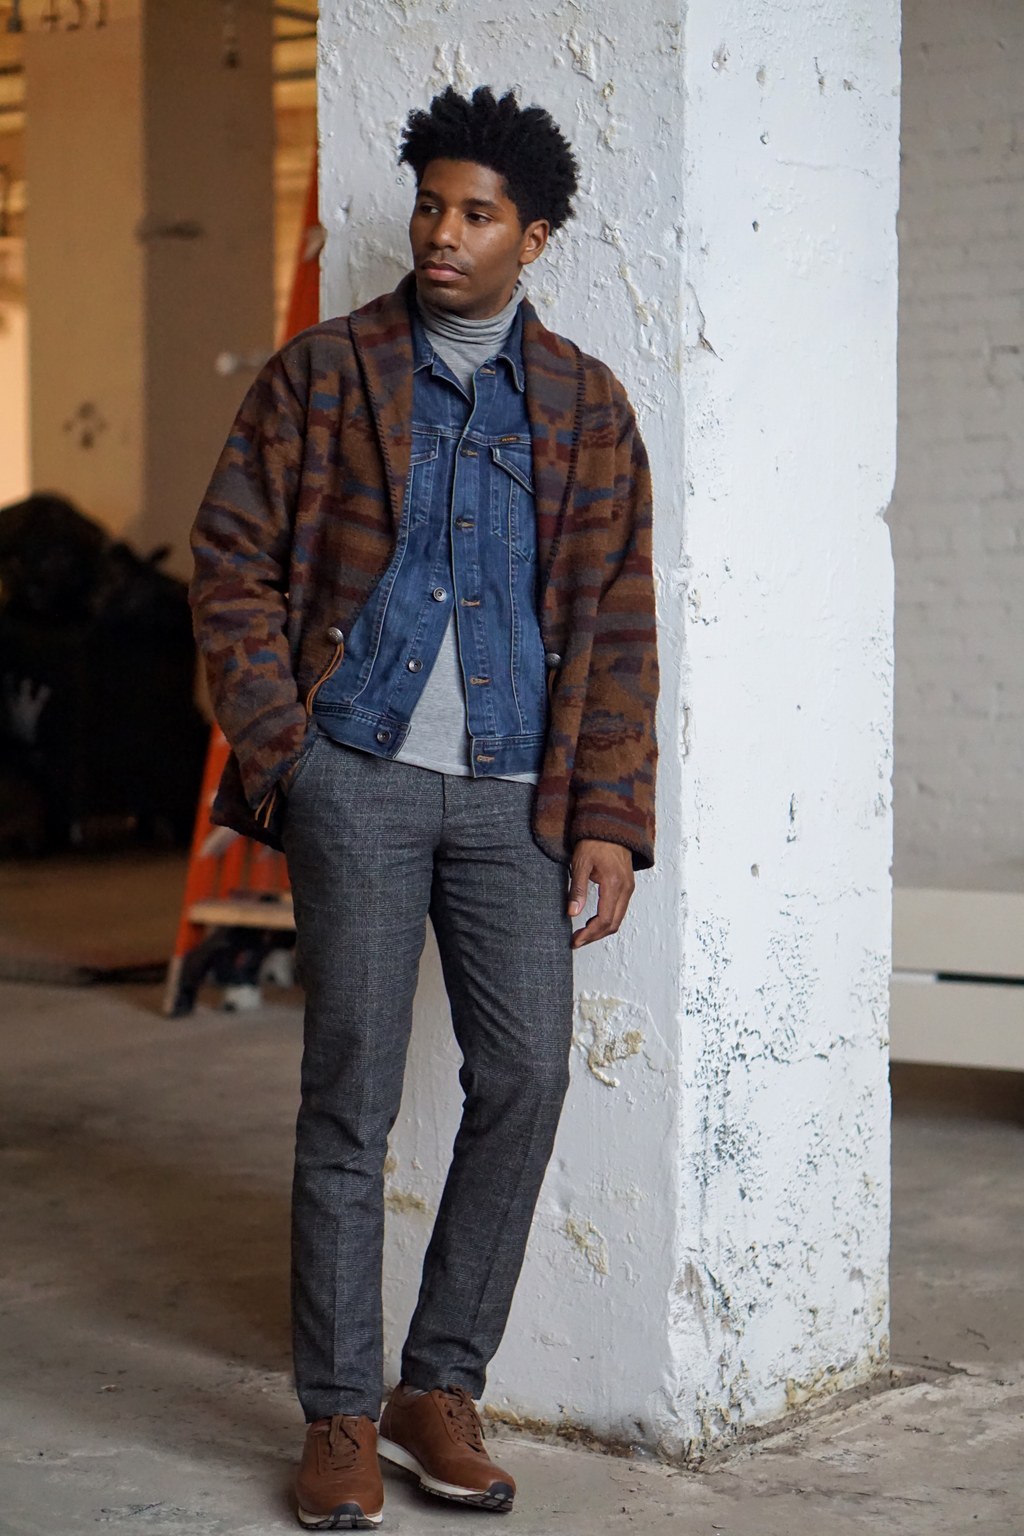 We Asked 17 People To Style A Denim Jacket And The Results Are Badass